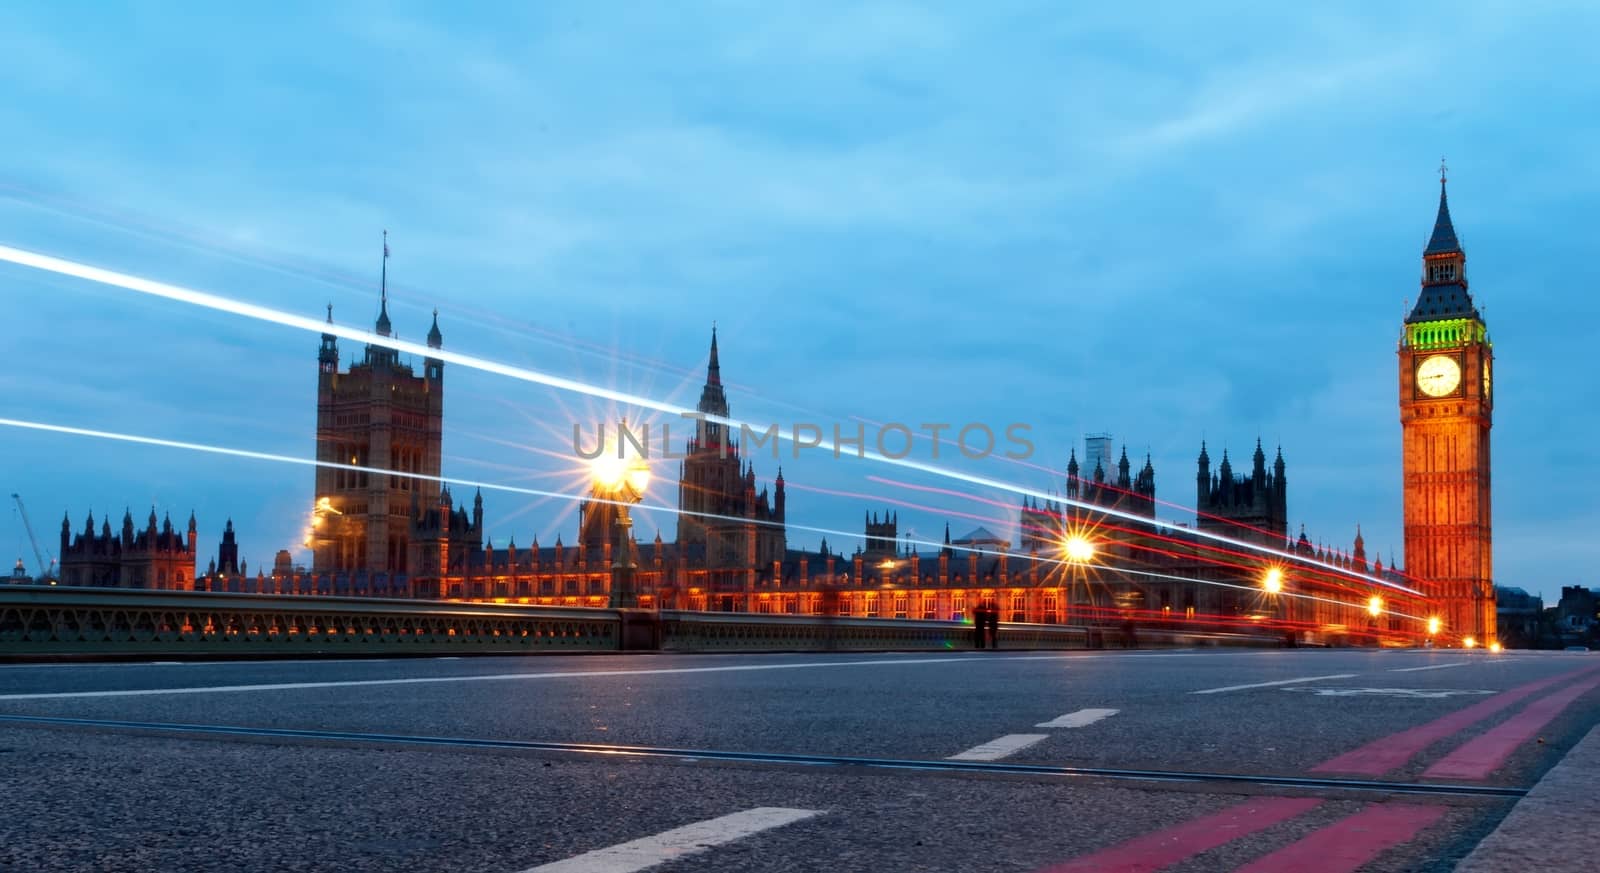 Big Ben, one of the most prominent symbols of both London and England, as shown at night along with the lights of the cars passing by by mitakag